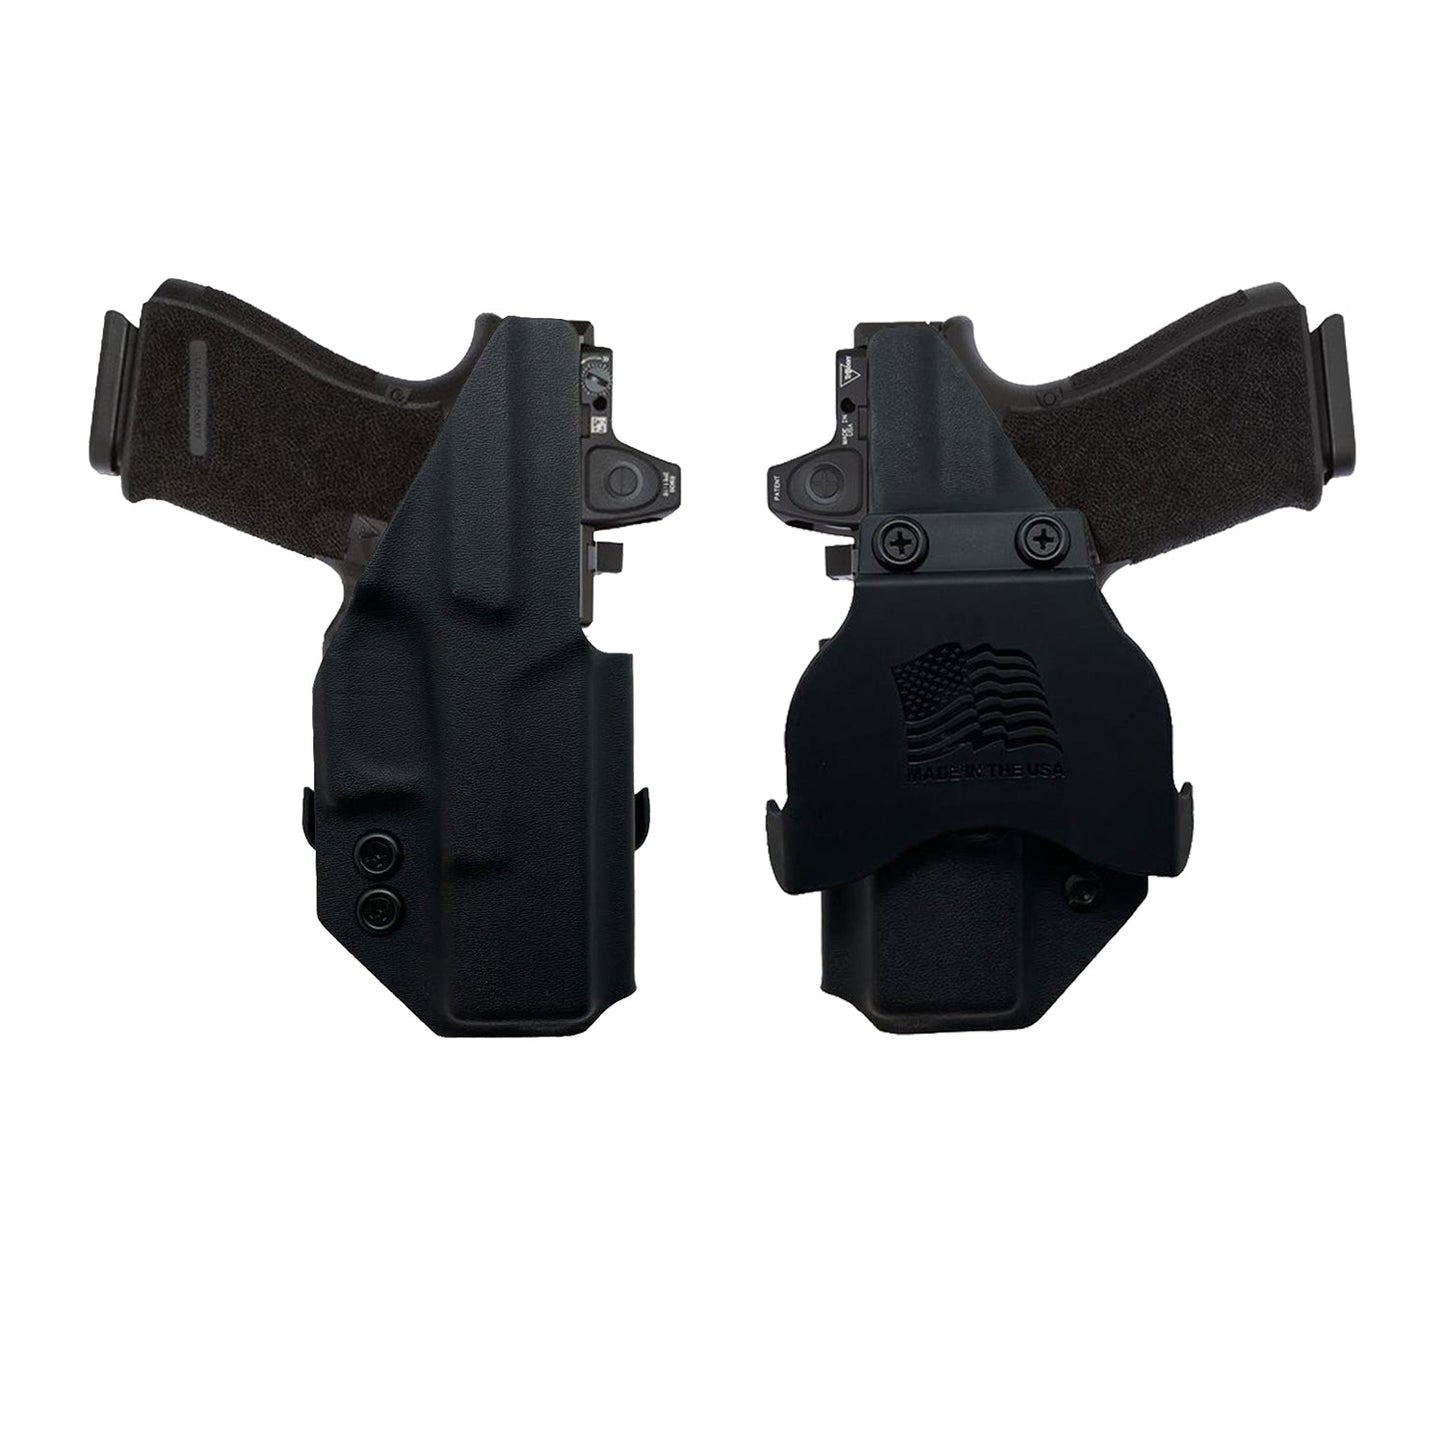 GLOCK 19/ 19X OWB (Outside The Waistband Holster)